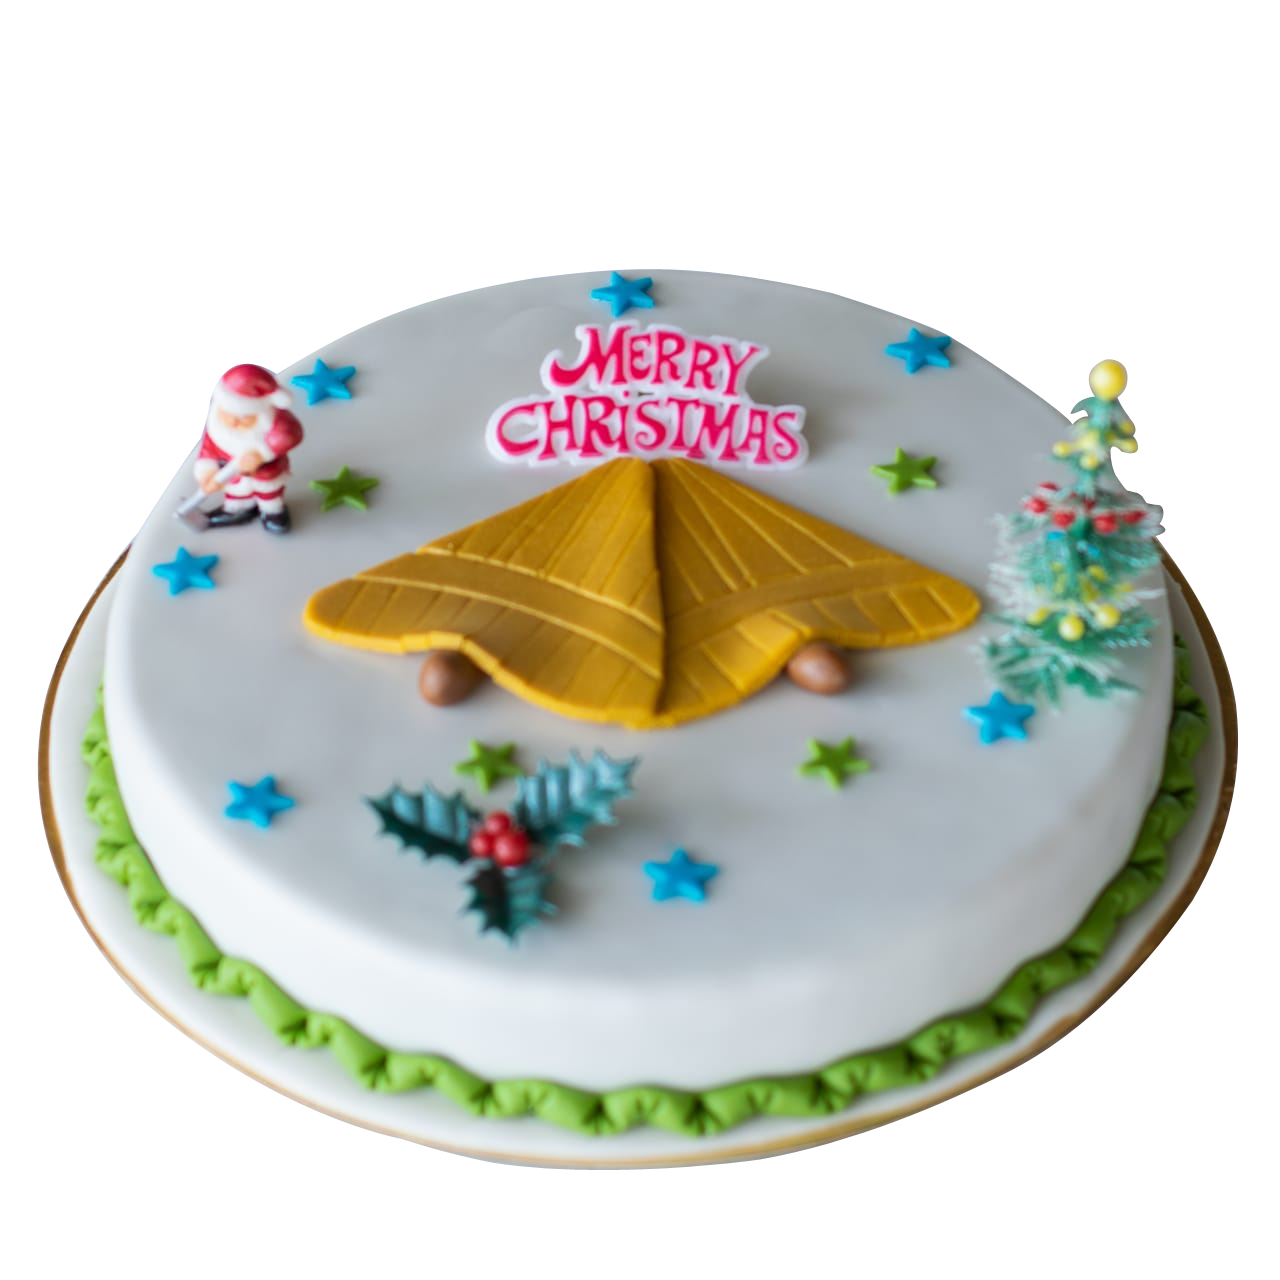 WishFirst Glitter Merry Christmas Happy Birthday Cake Topper for Santa  Claus Tree Snowman Sock Candy Theme Wedding Halloween Grinch Anniversary  Birthday Party Cake Decorations : Amazon.ae: Grocery